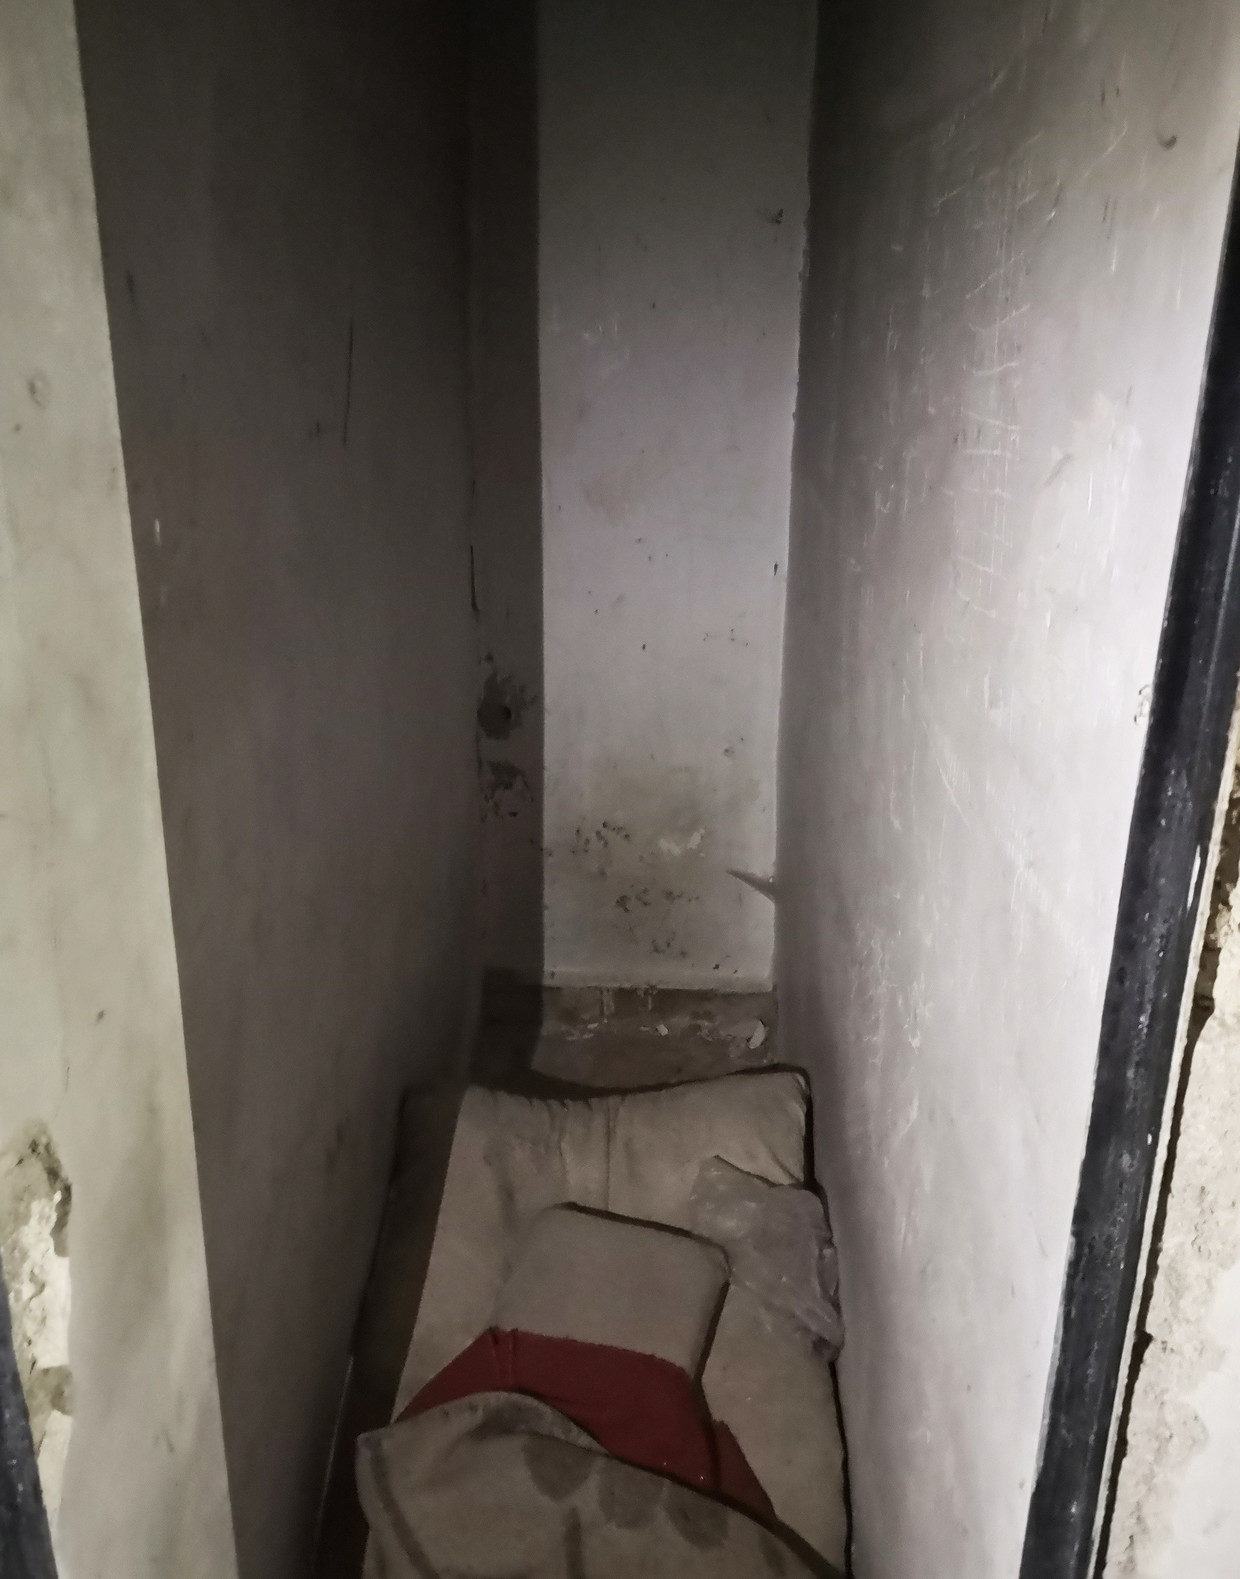 solitary confinement cell in Douma